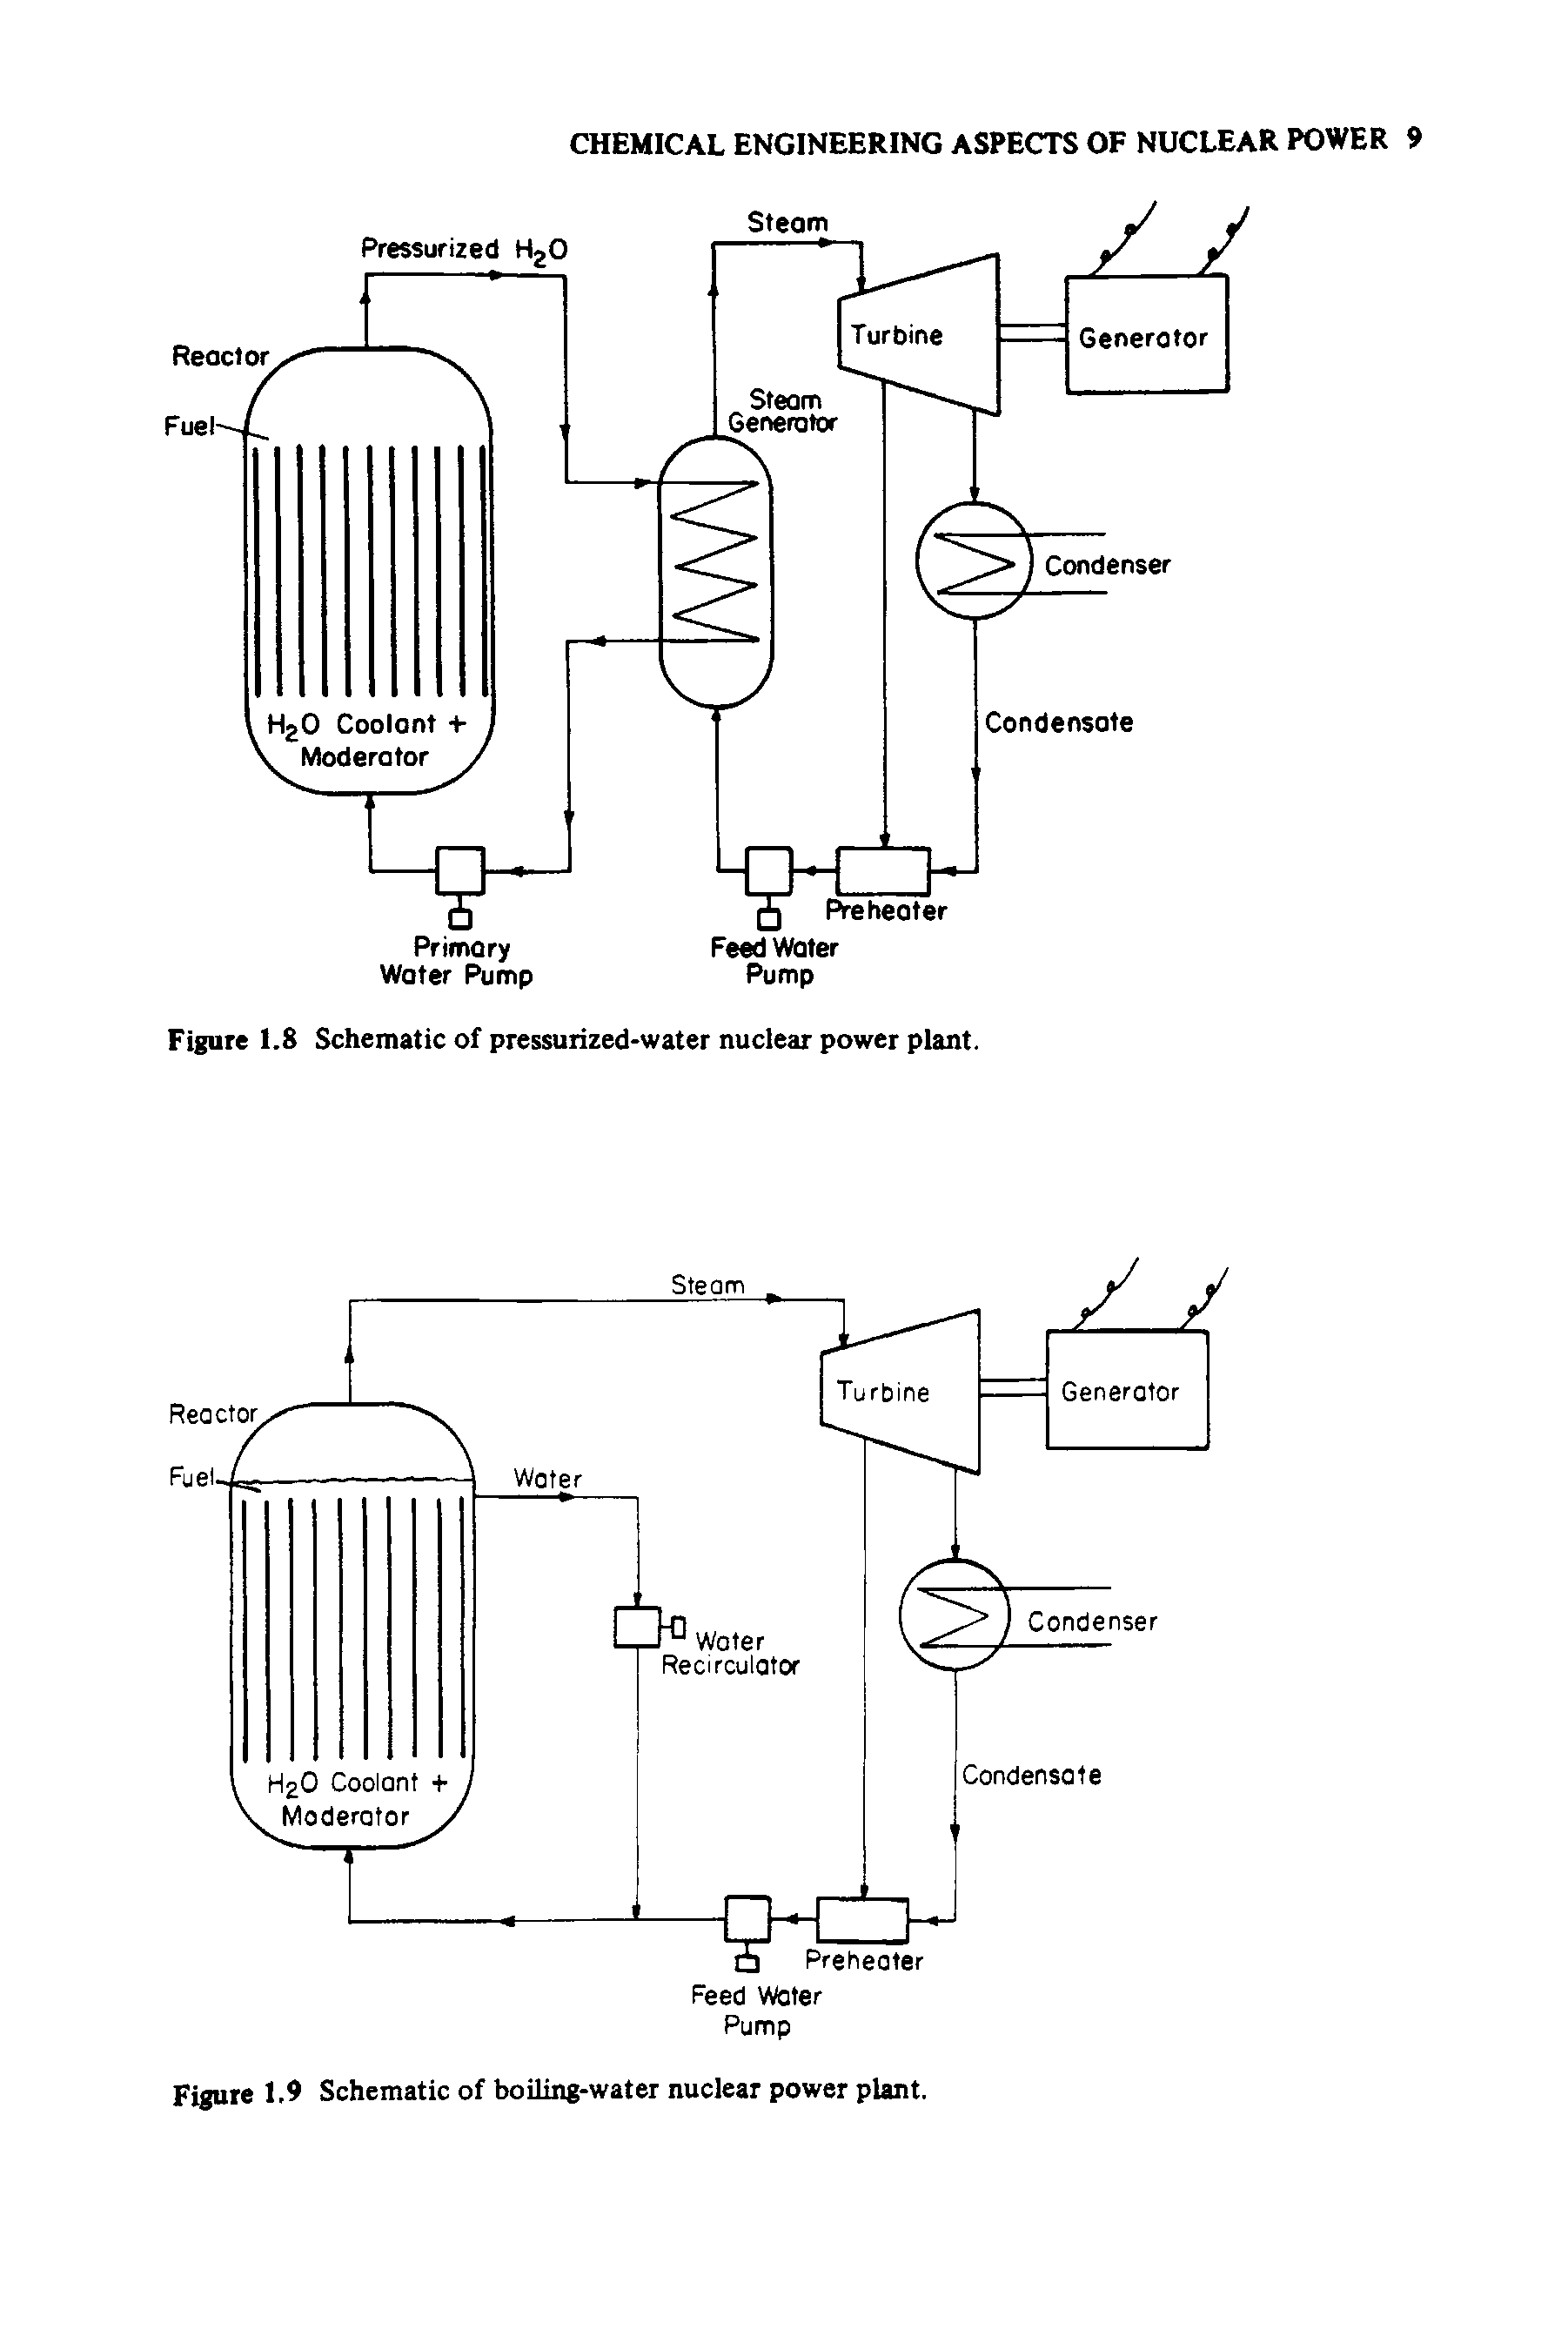 Figure 1.8 Schematic of pressurized-water nuclear power plant.